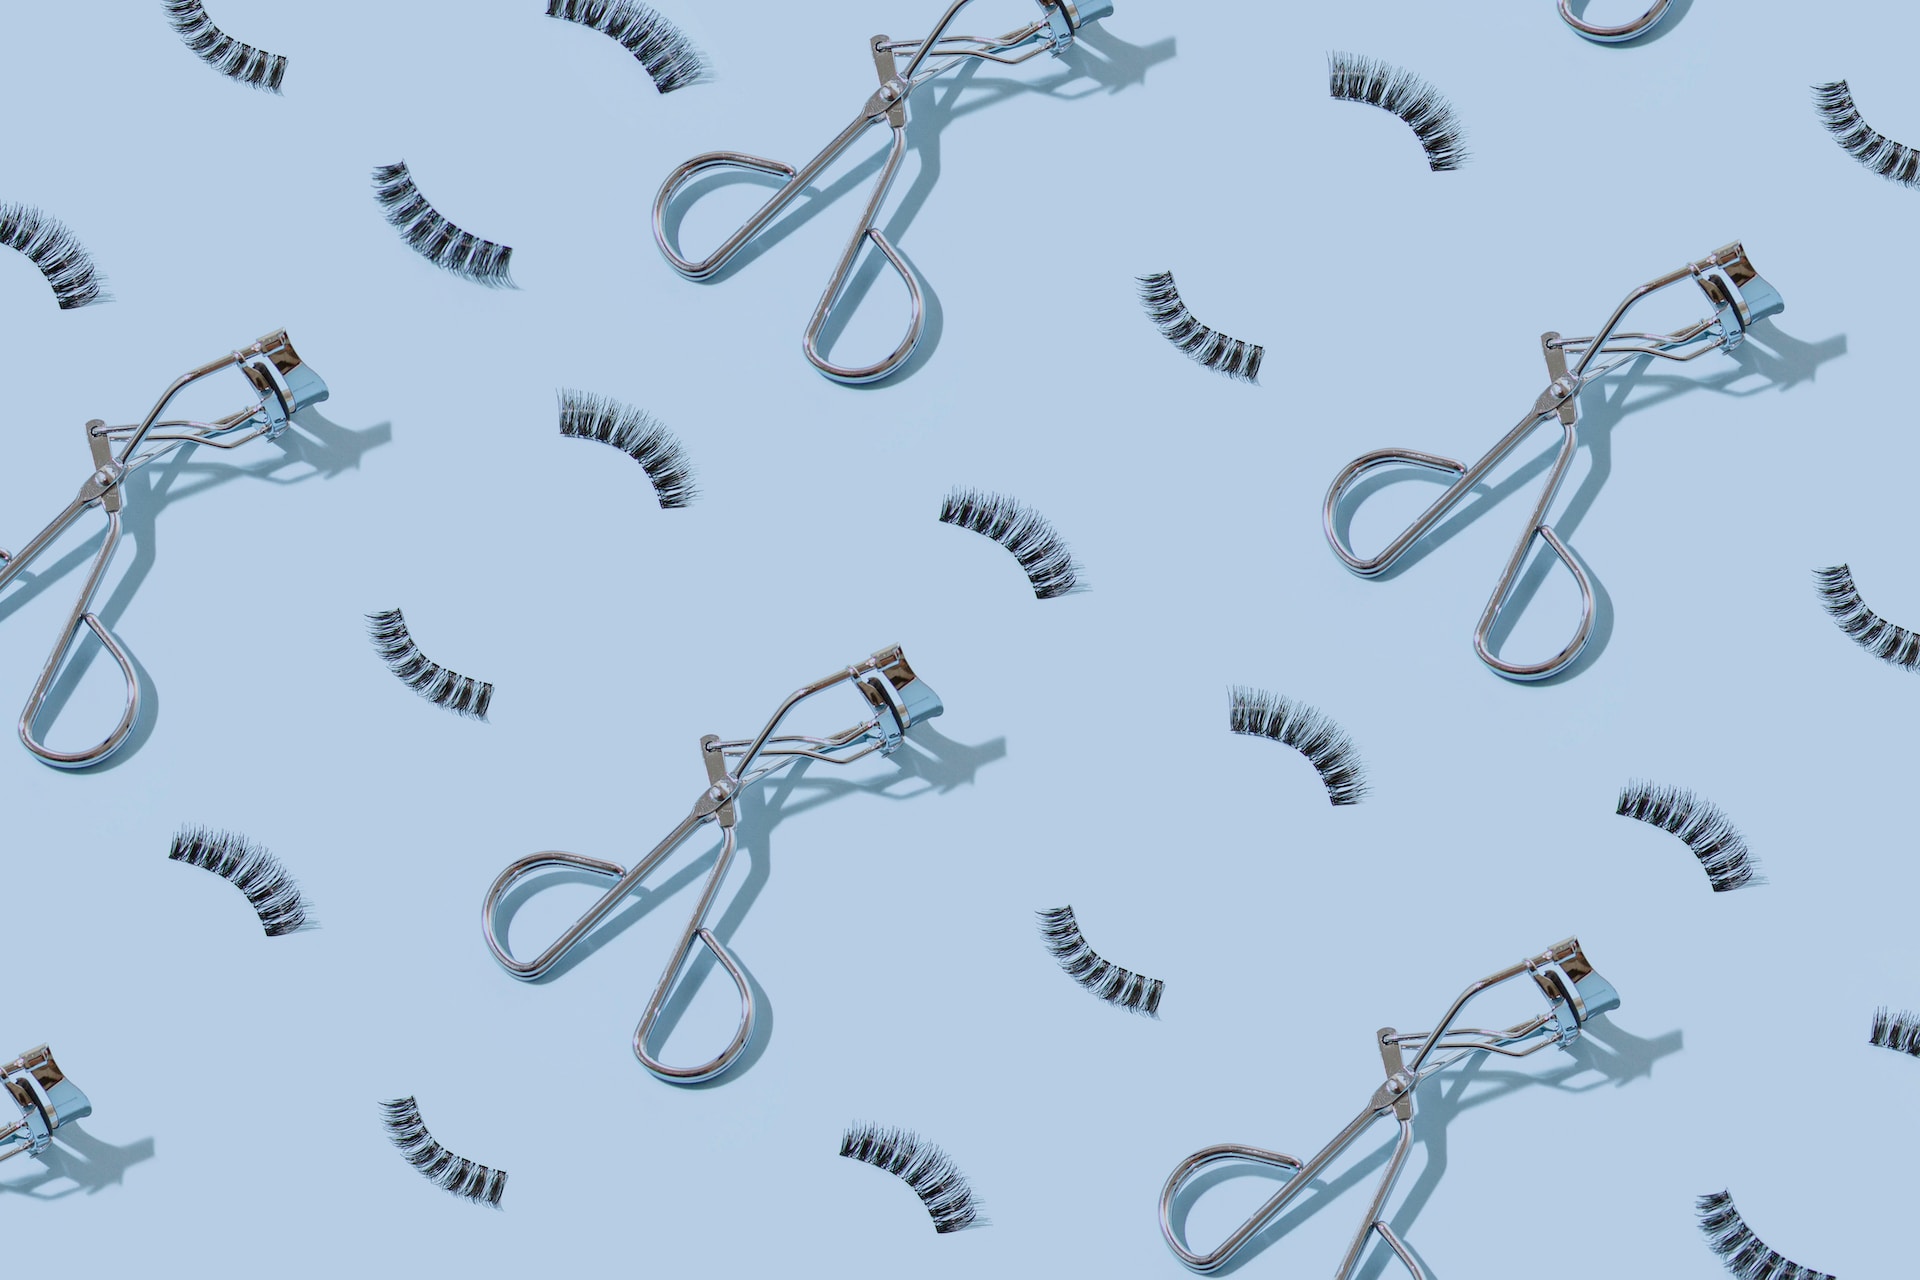 eyelash curlers with lash extensions on a blue background